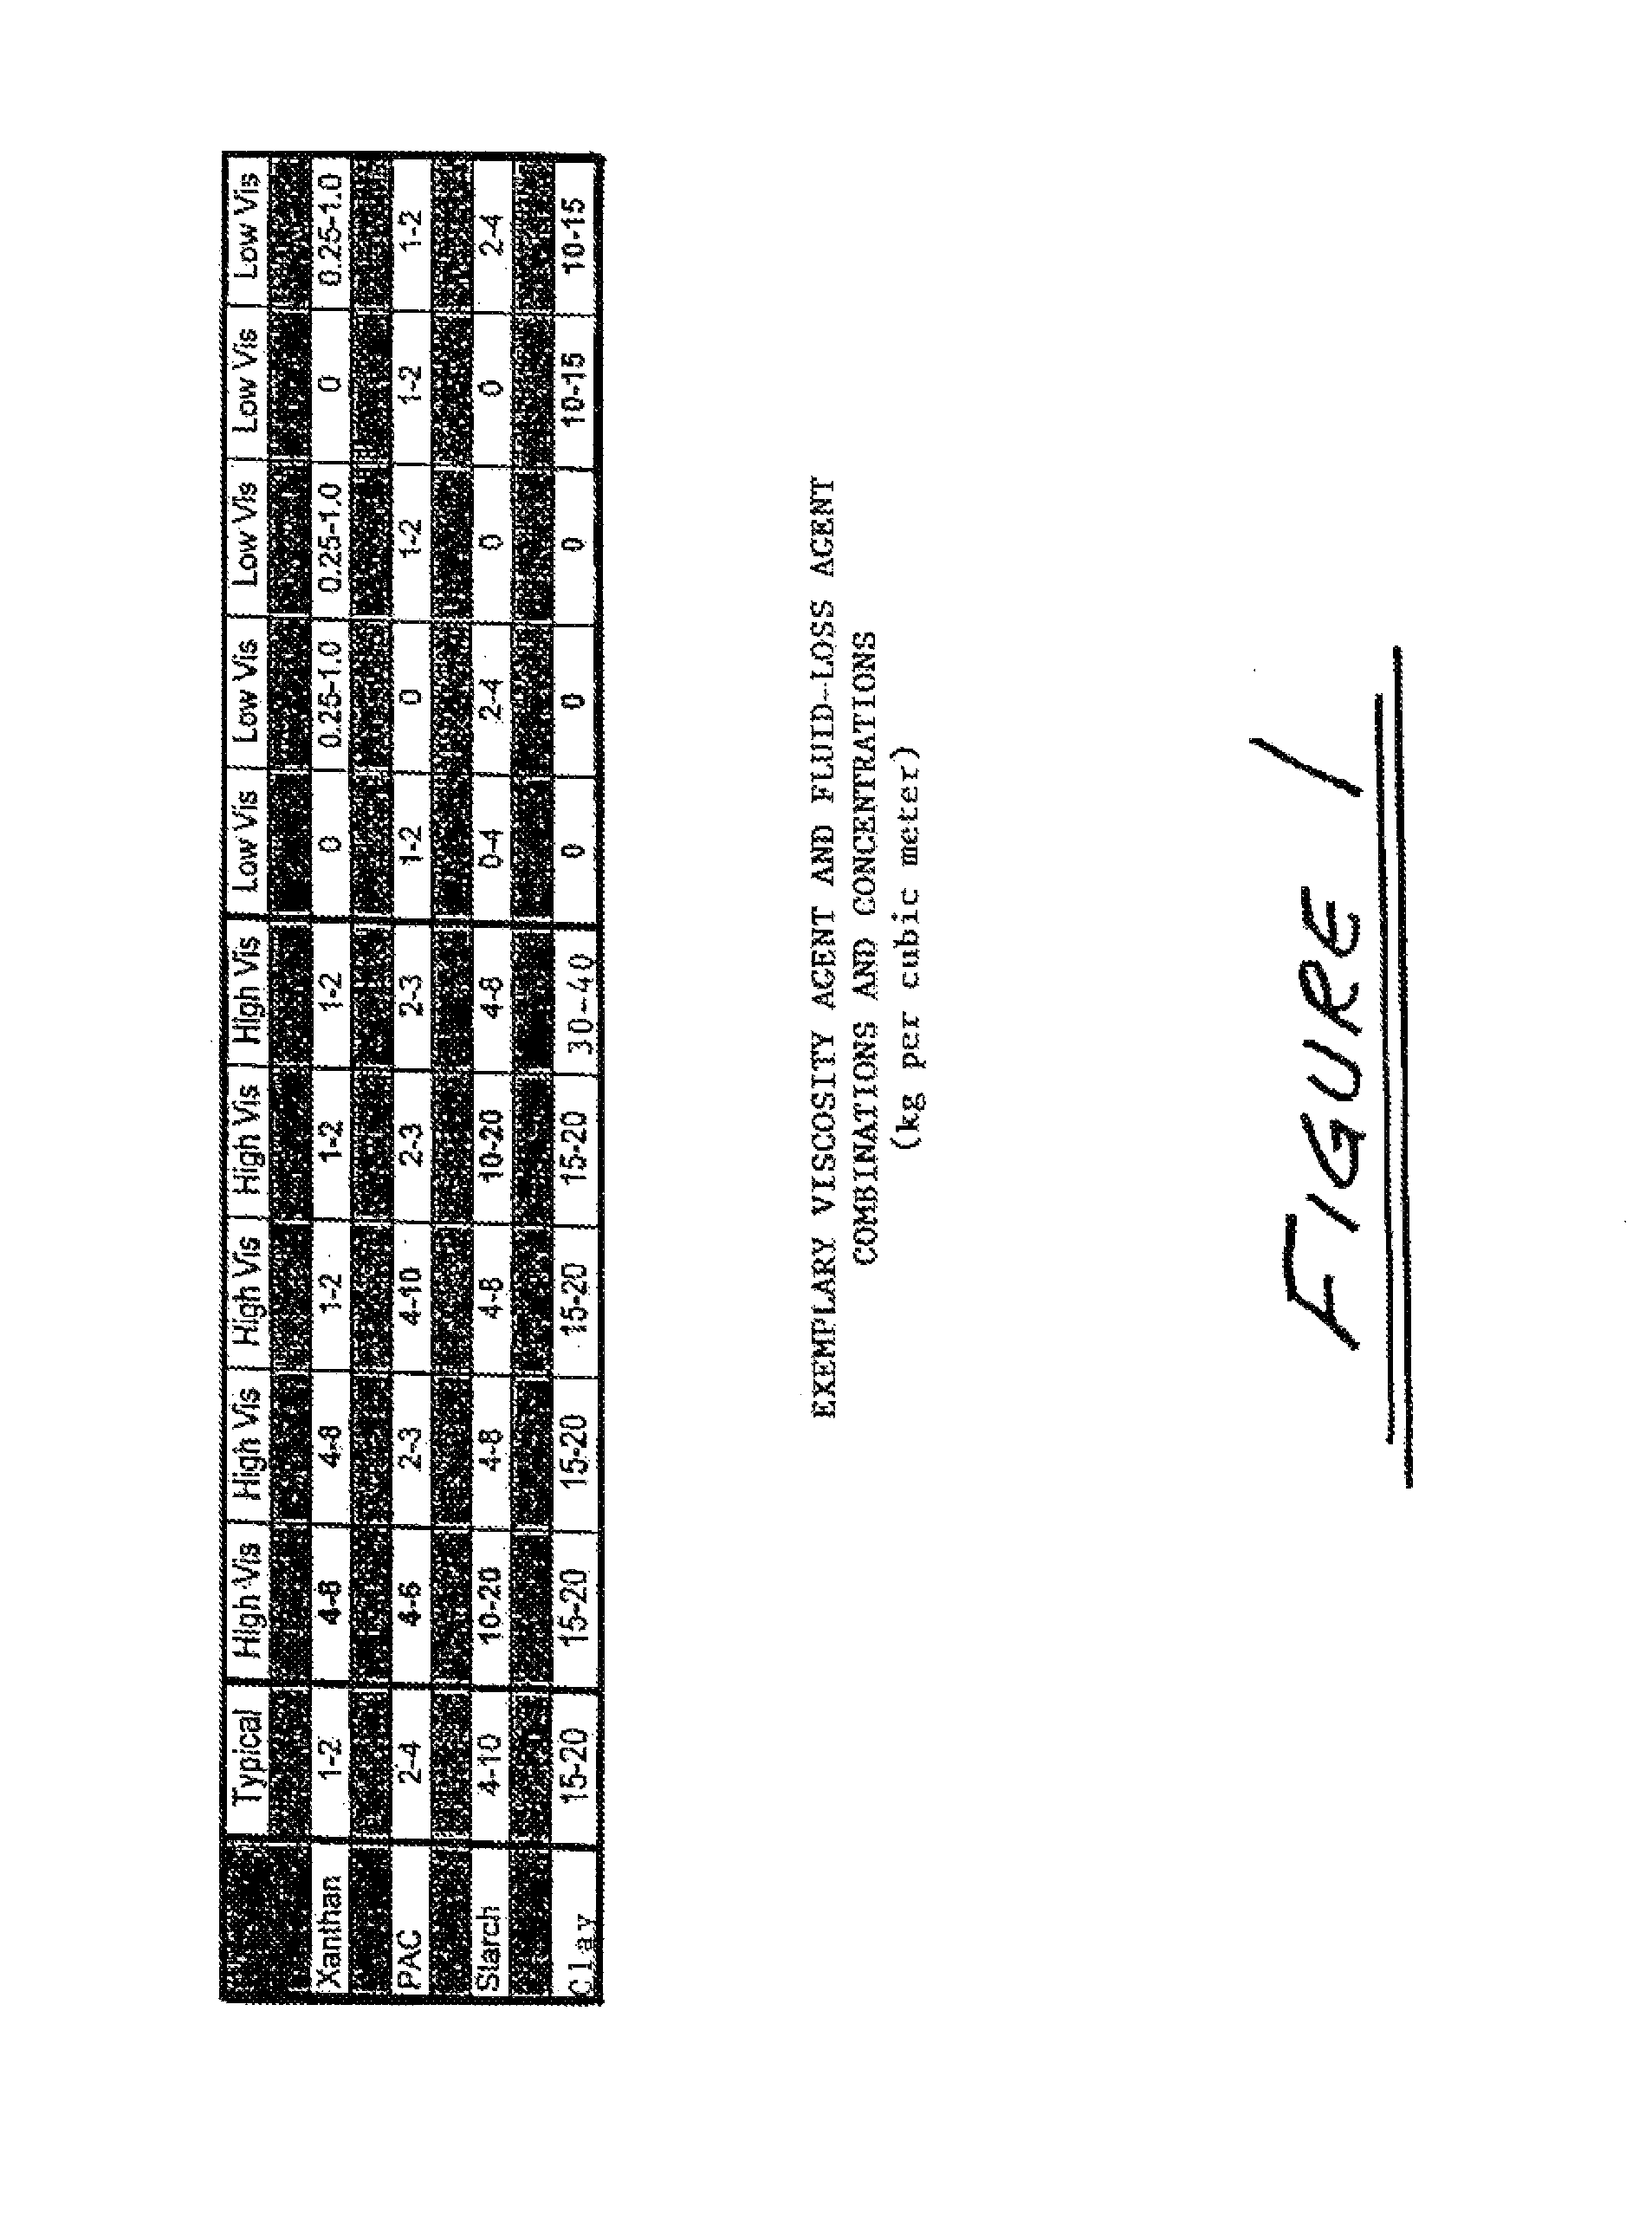 Emulsified polymer drilling fluid and methods of preparation